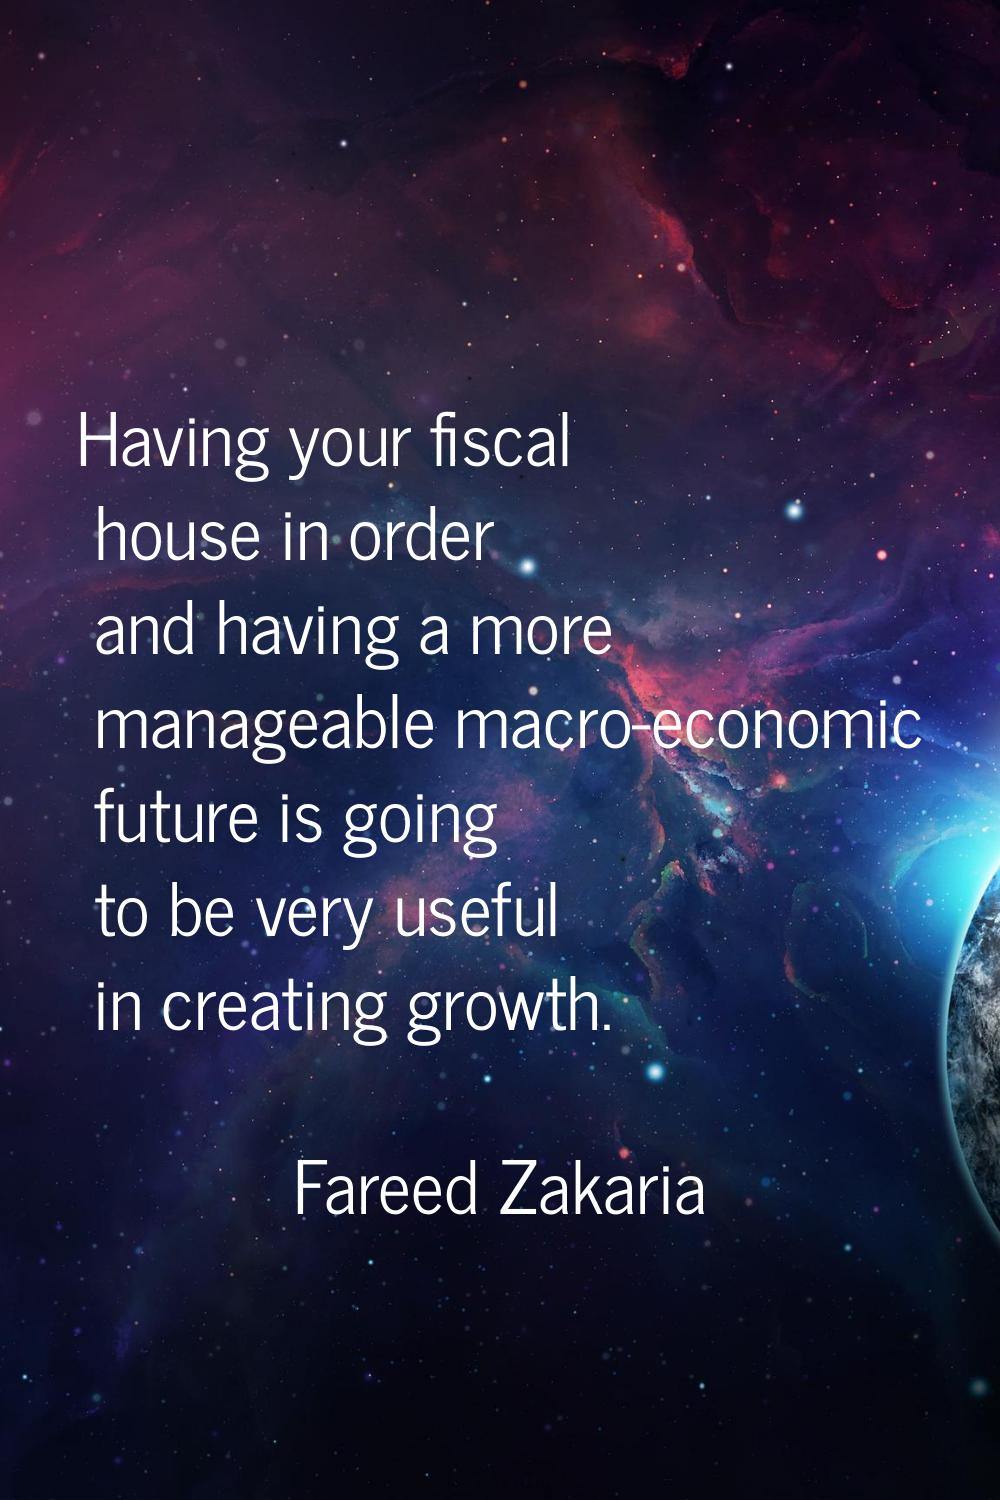 Having your fiscal house in order and having a more manageable macro-economic future is going to be